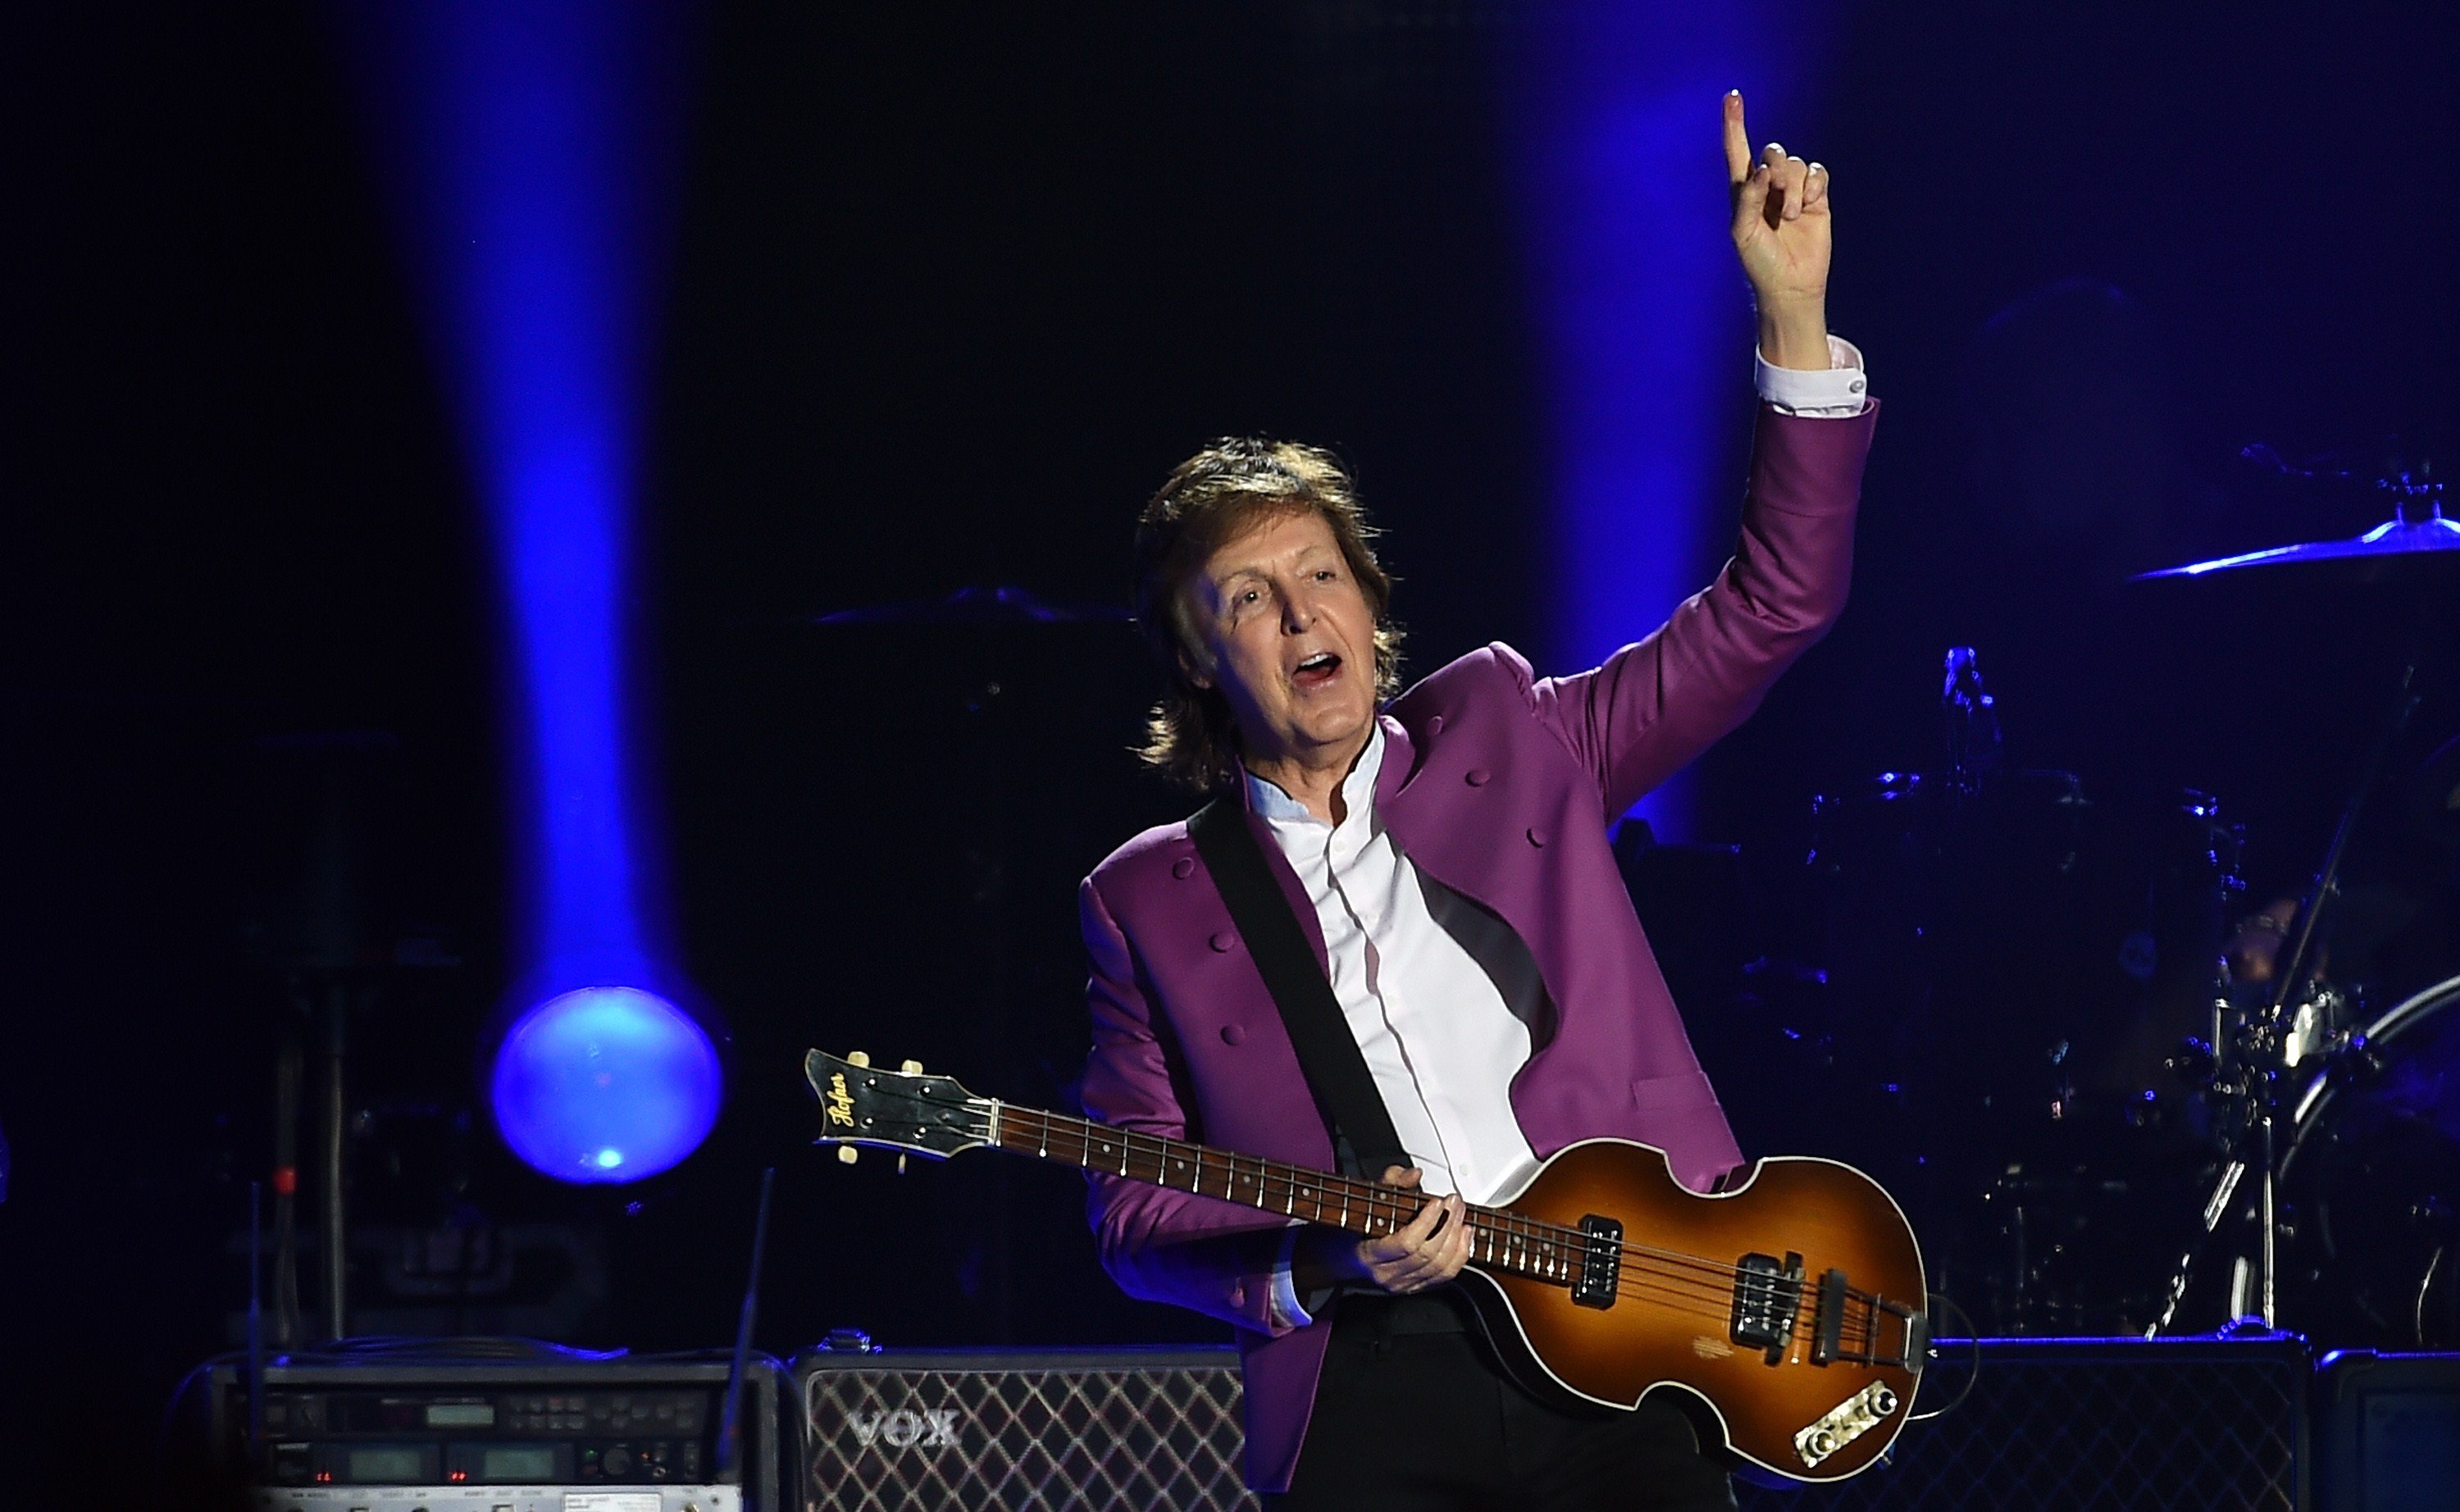 Paul McCartney formerly of The Beatles performs at the Stade Velodrome in France